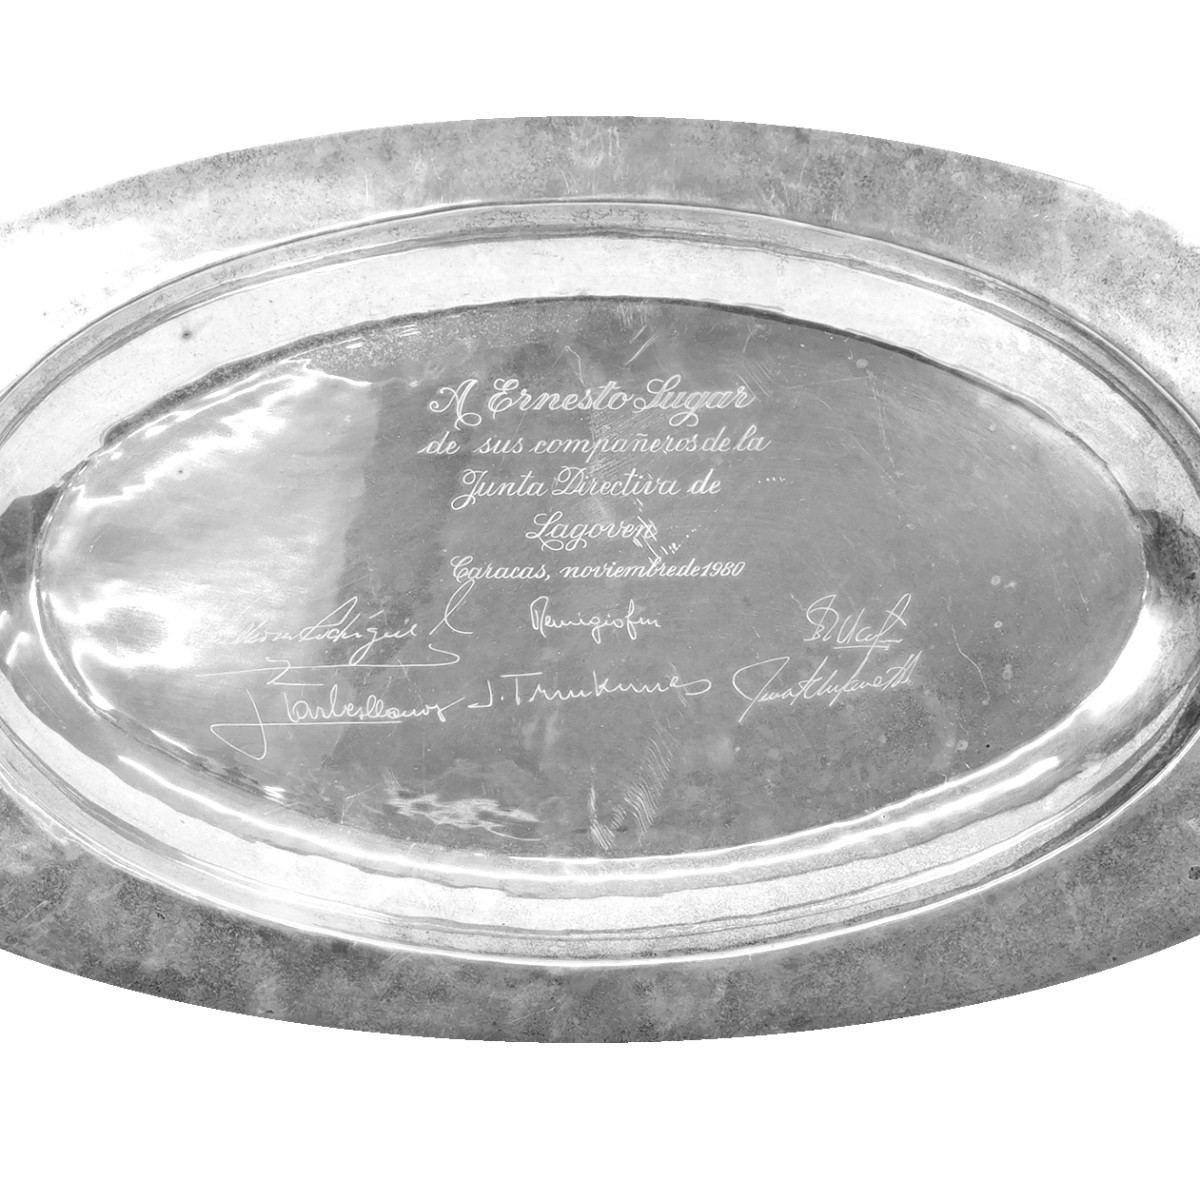 925 Sterling Oval Tray